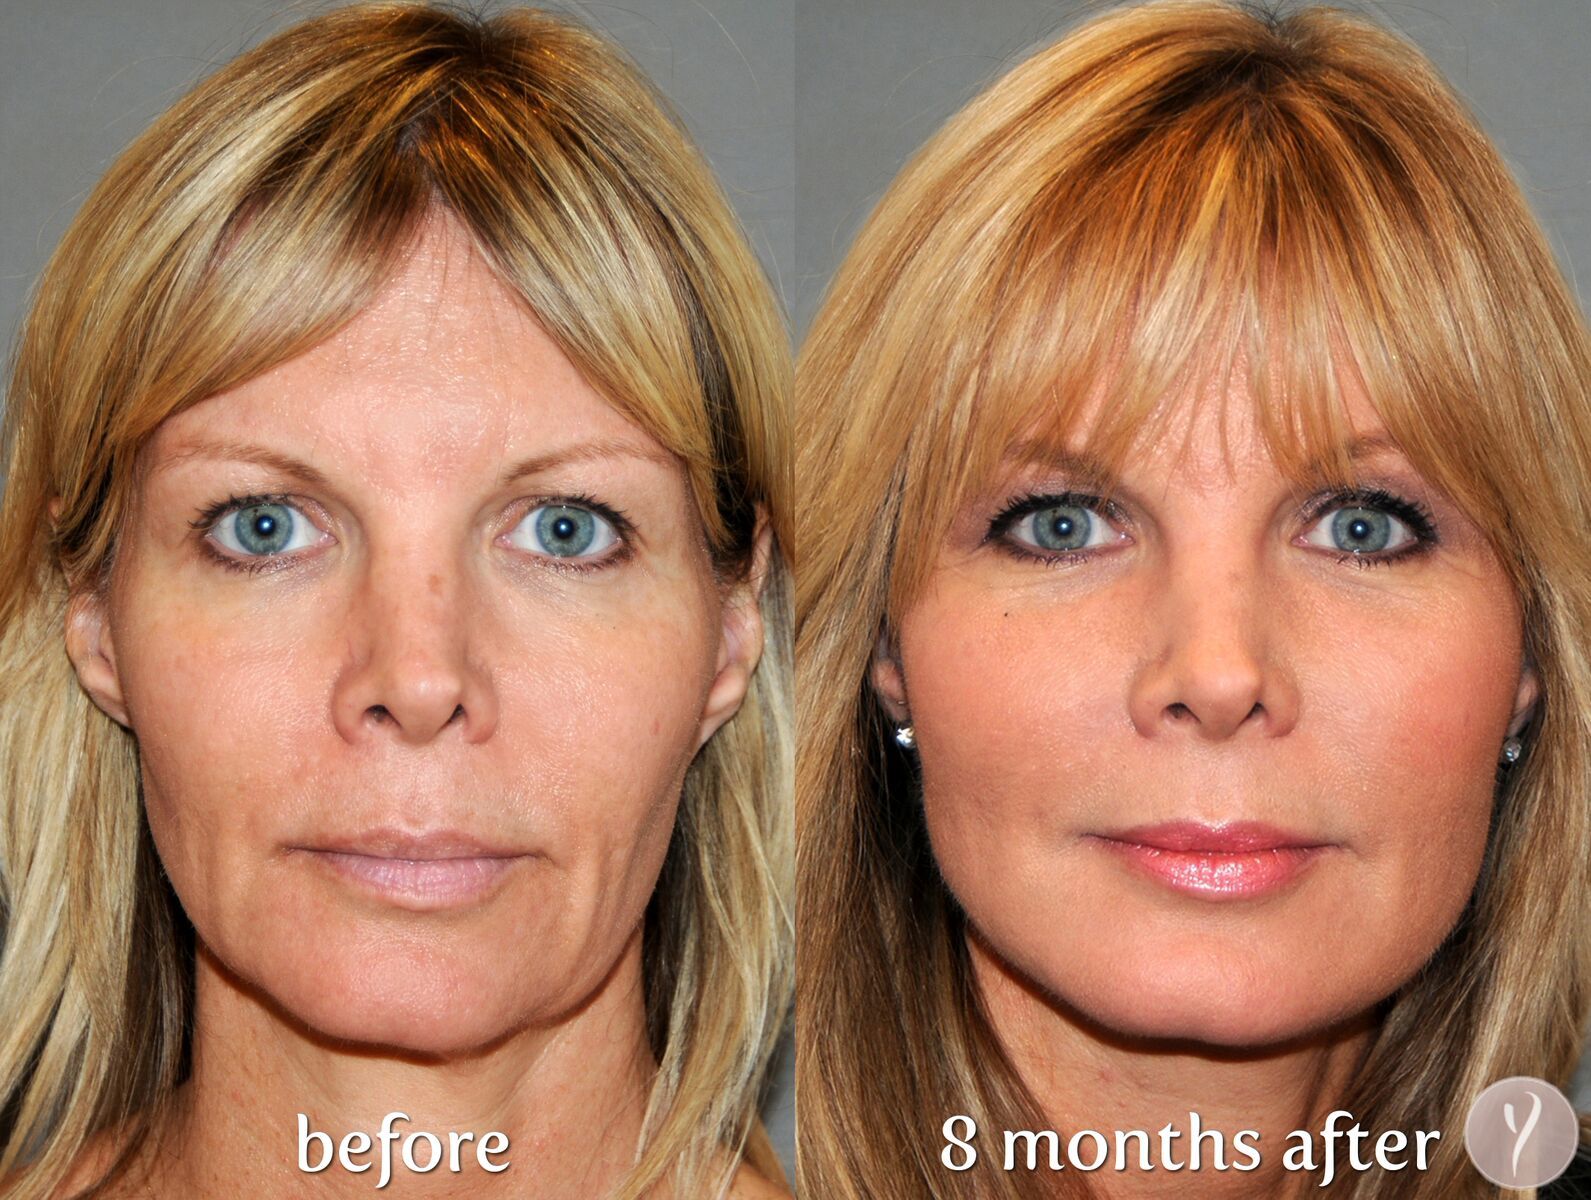 Facelift Surgery 5 Useful And Significant Facts